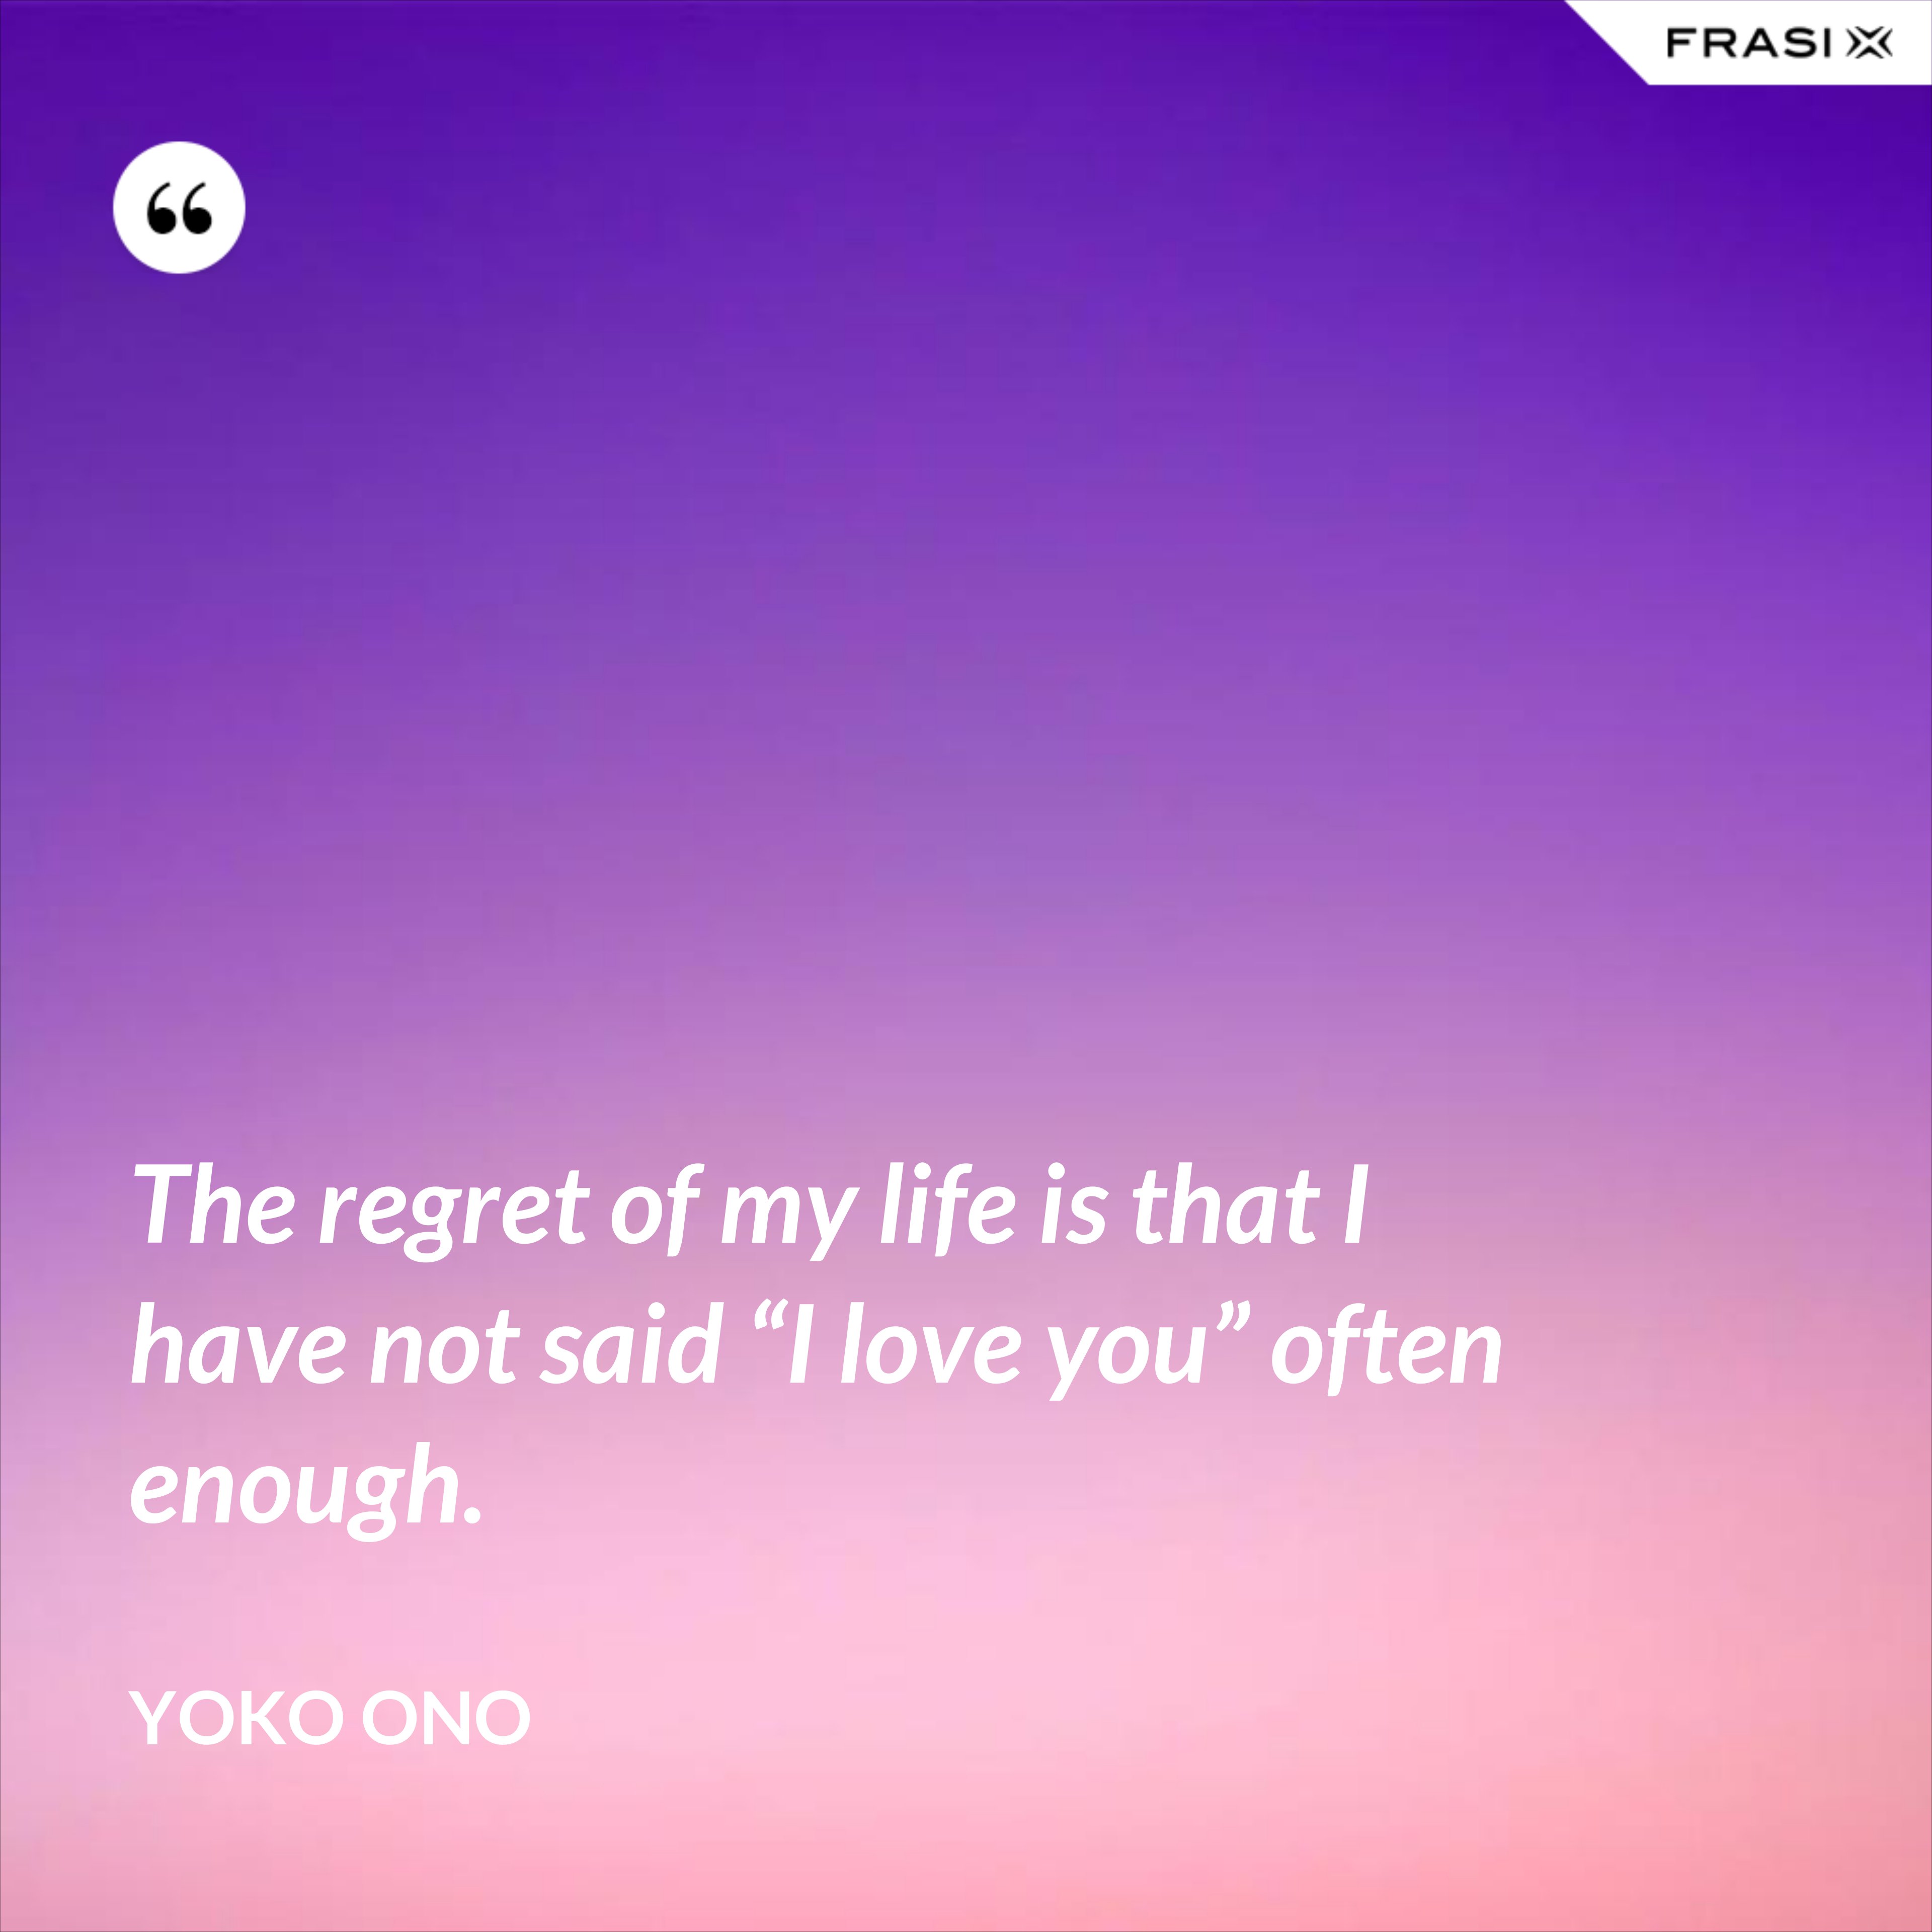 The regret of my life is that I have not said “I love you” often enough. - Yoko Ono